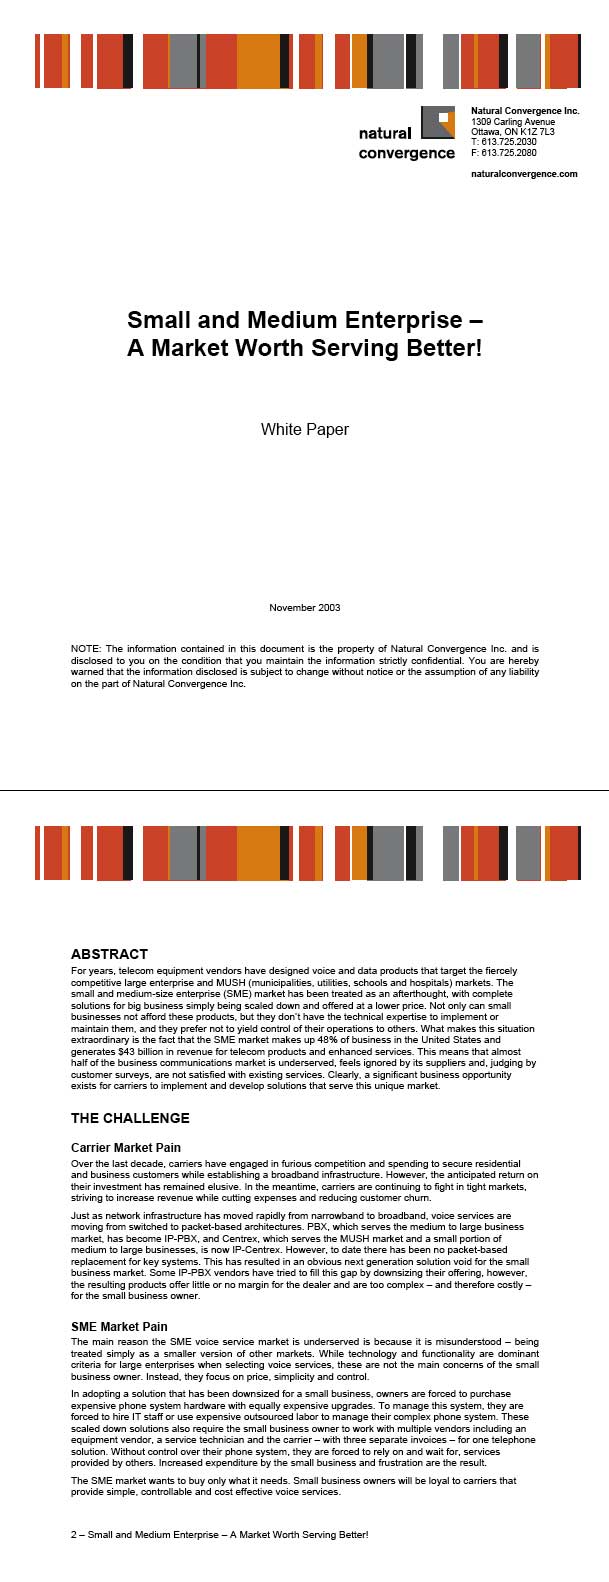 Natural Convergence white paper writing sample by the professional copywriters at pens4hire